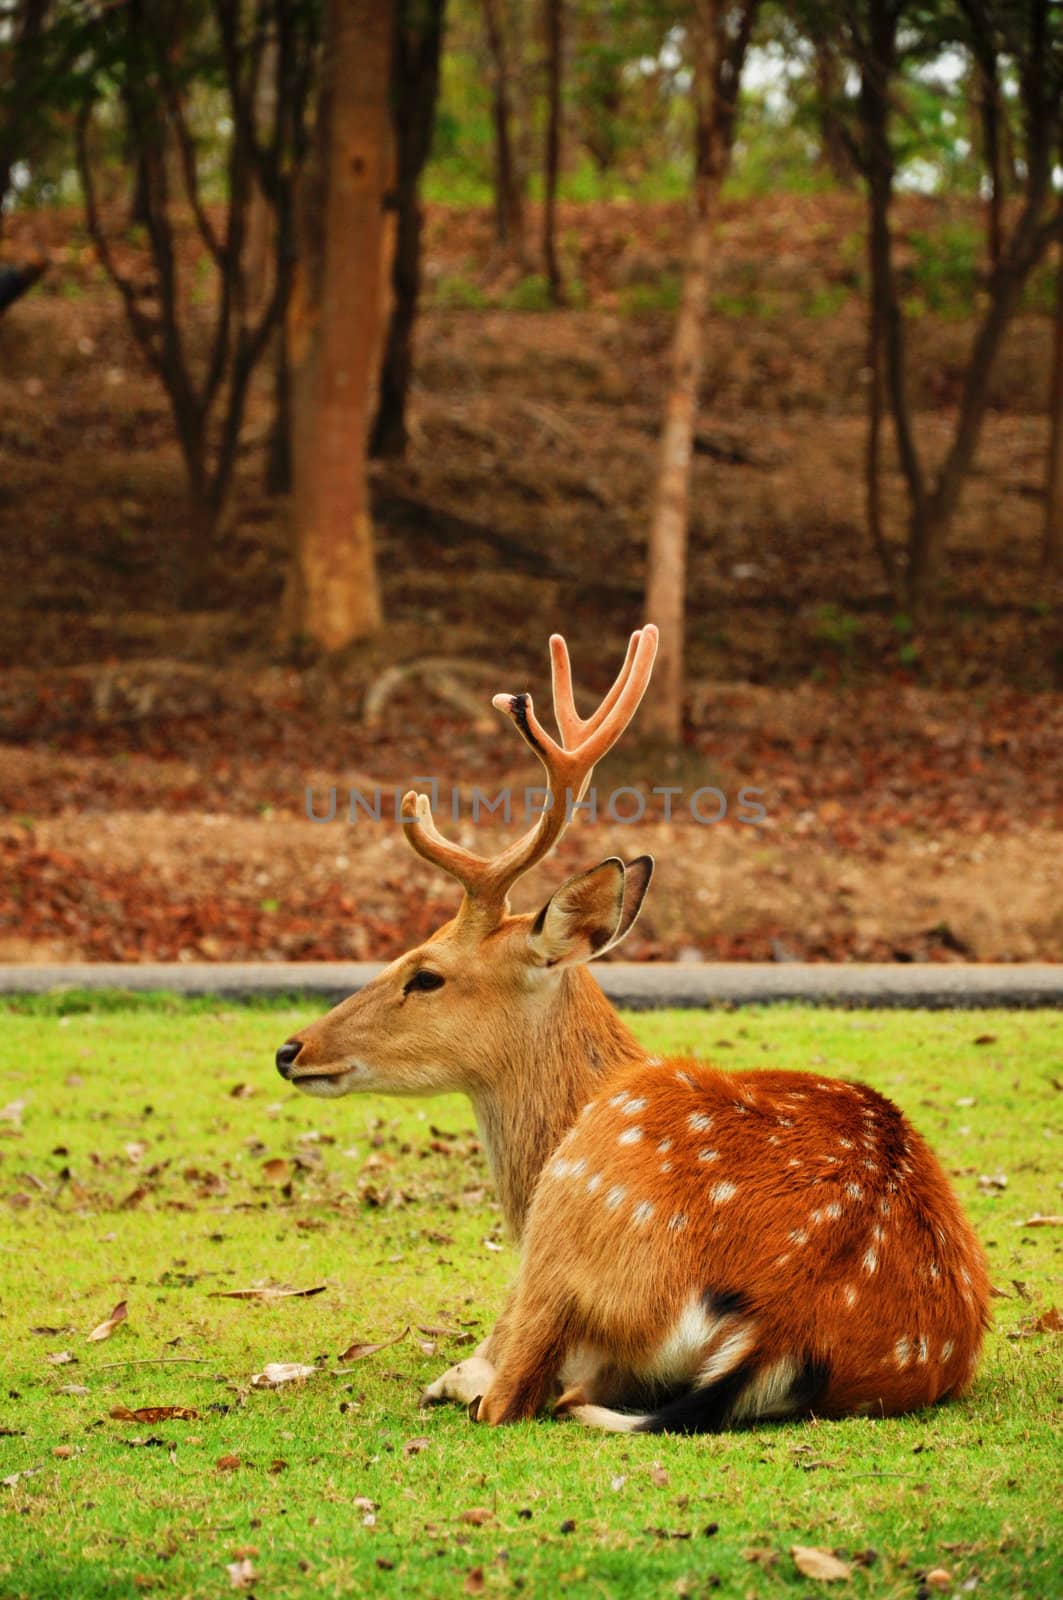 The sika deer by MaZiKab